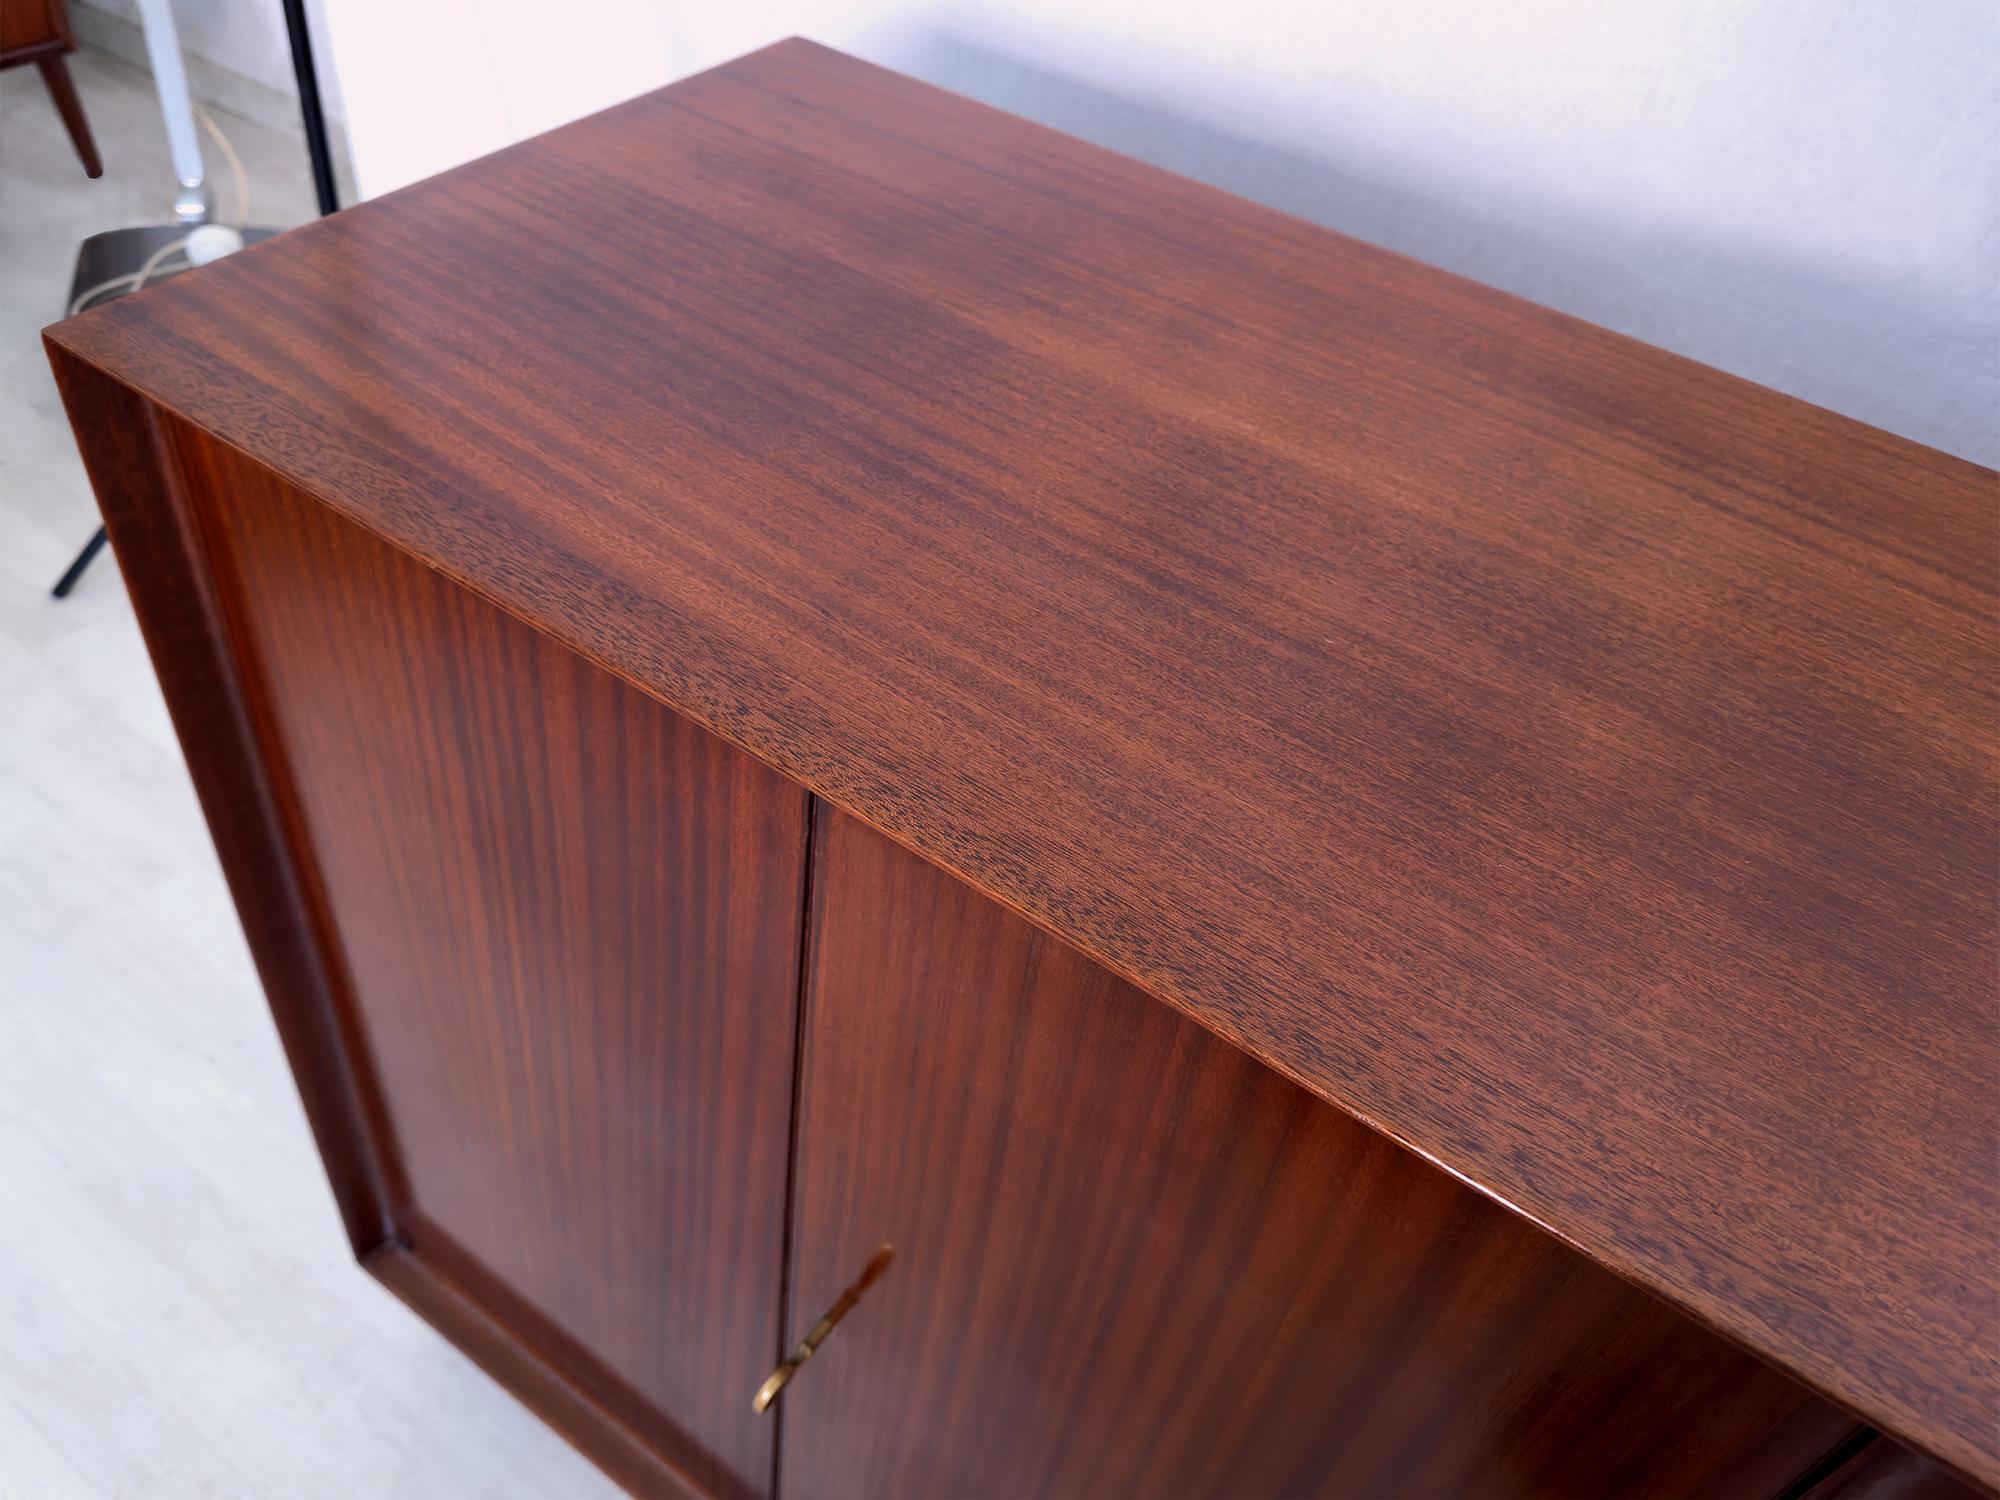 Italian Mid-Century Teak Wood Sideboard with Bar Cabinet by Vittorio Dassi, 1950s For Sale 4